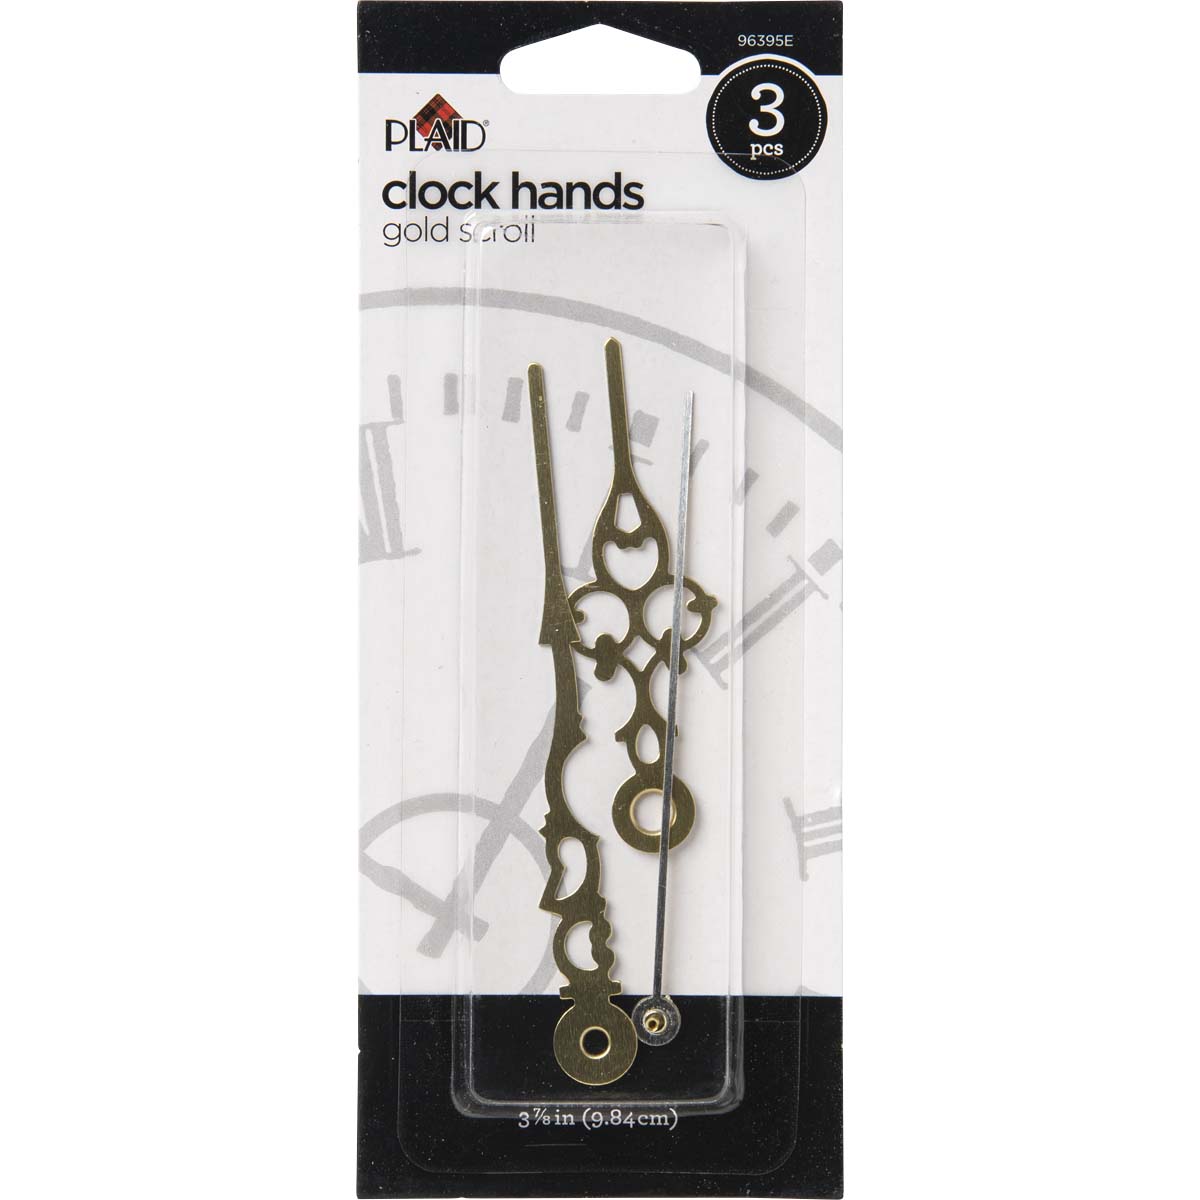 3-7/8" - 96395E Plaid Accessories Details about   Clock Hands Scroll Gold 3 pc 